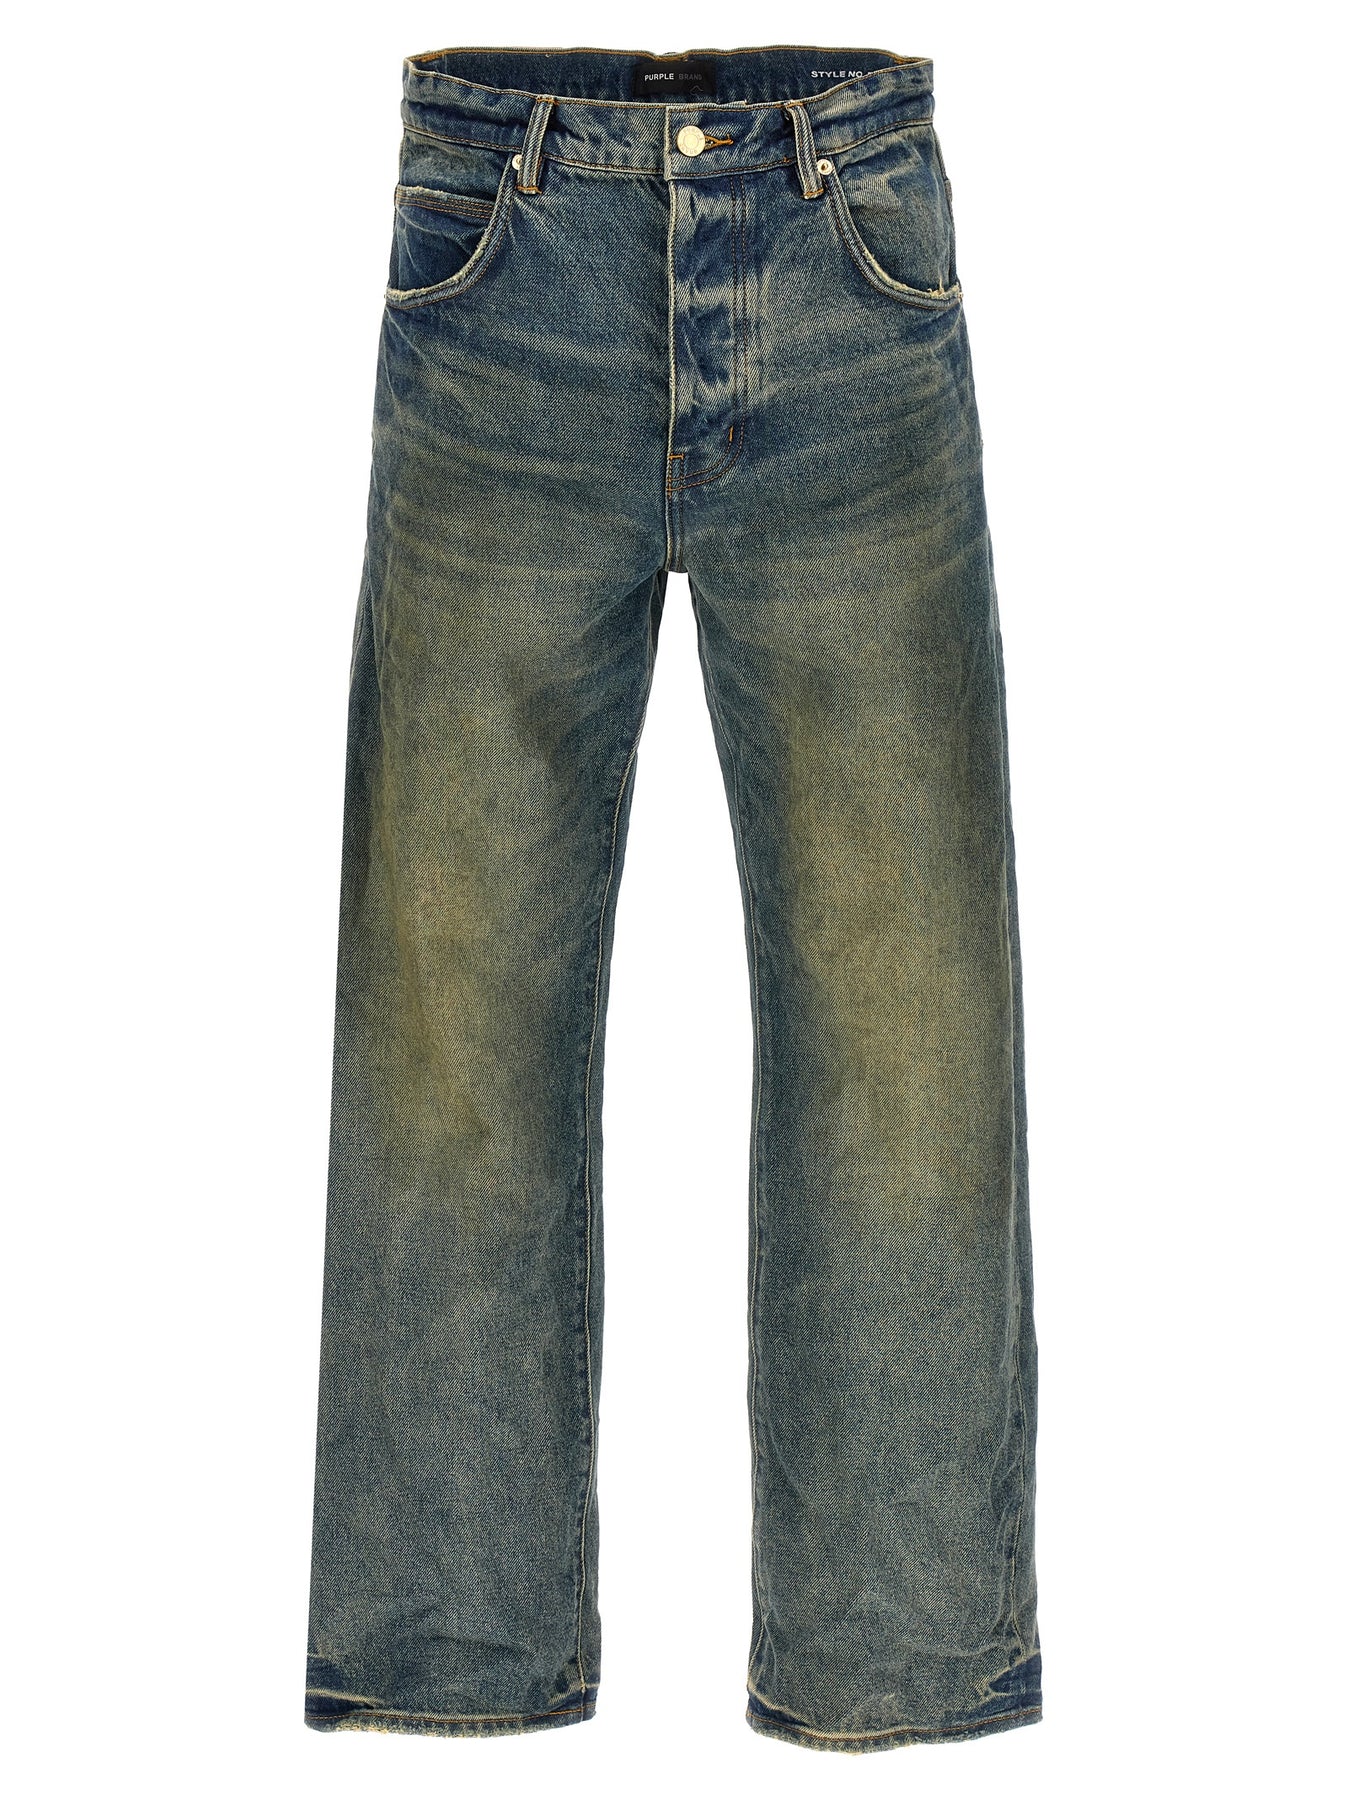 PURPLE RELAXED VINTAGE DIRTY JEANS